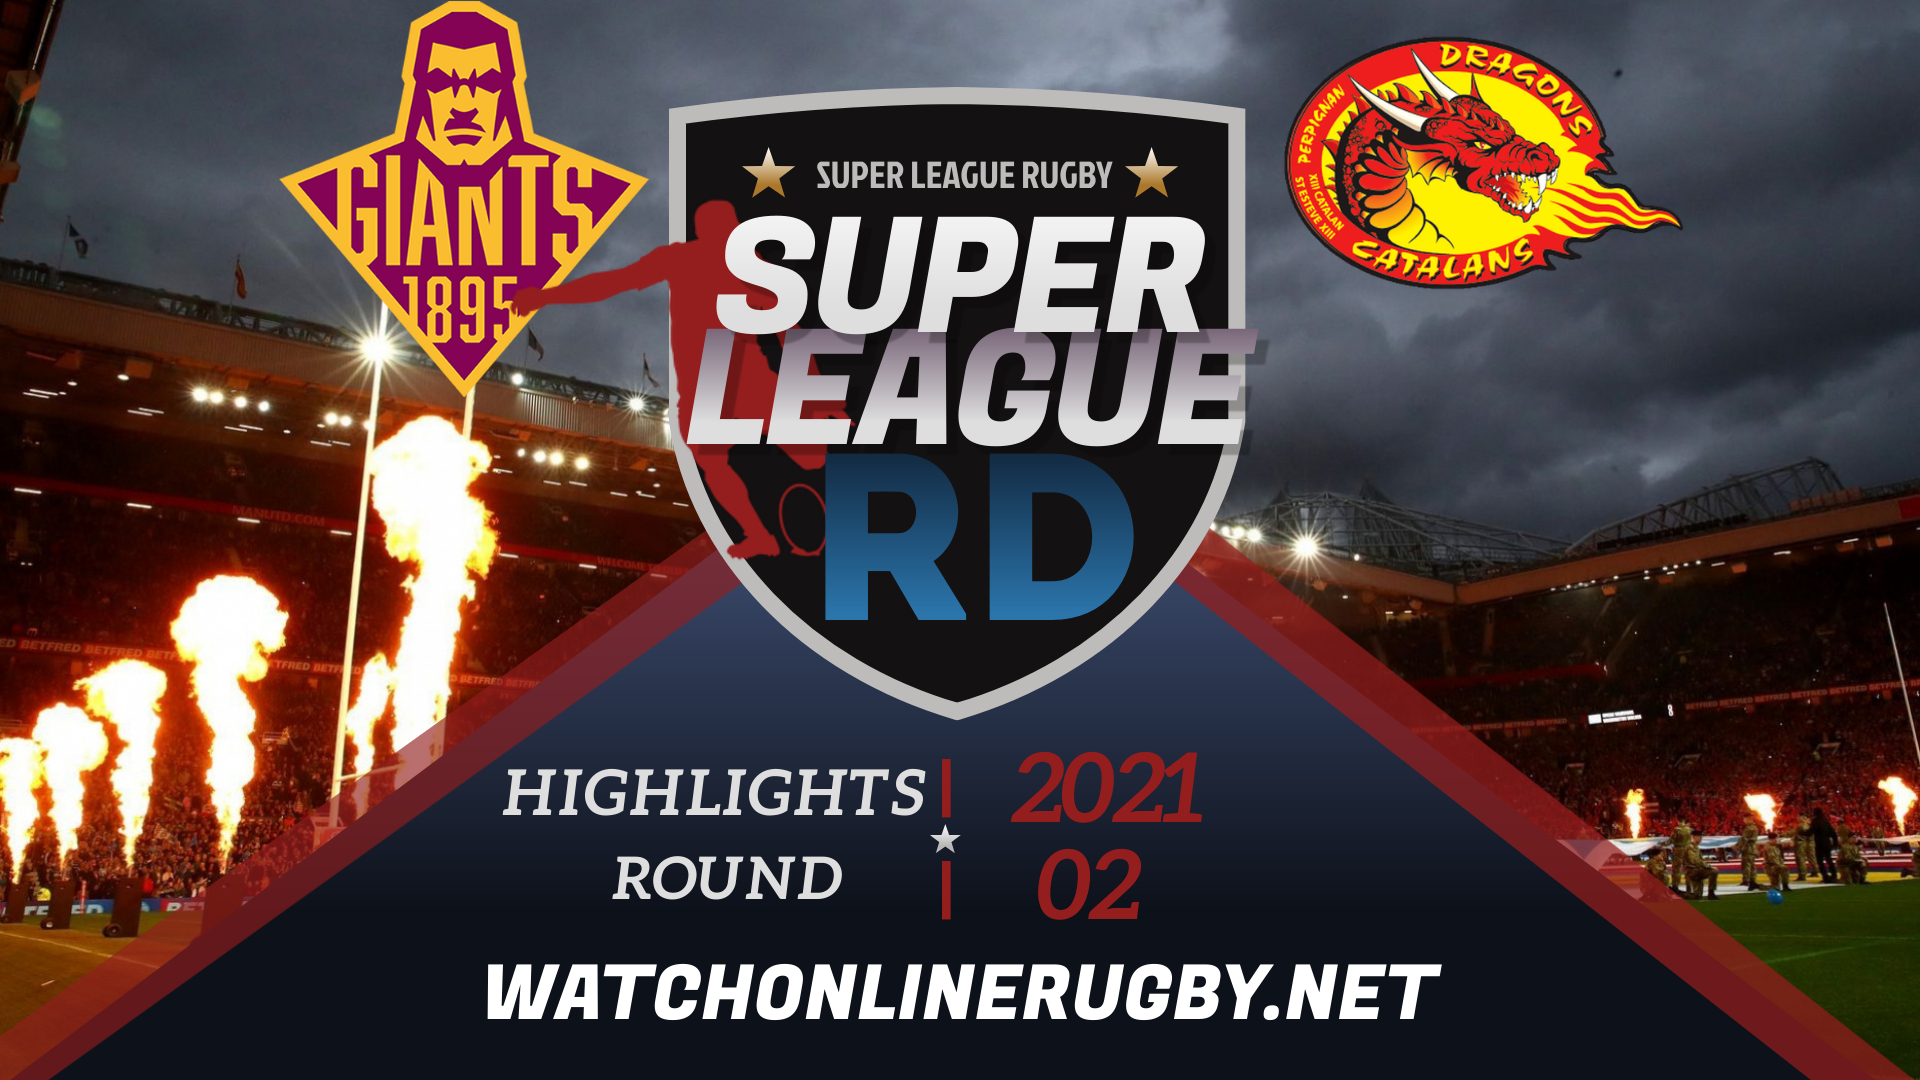 Huddersfield Giants Vs Dragons Super League Rugby 2021 RD 2